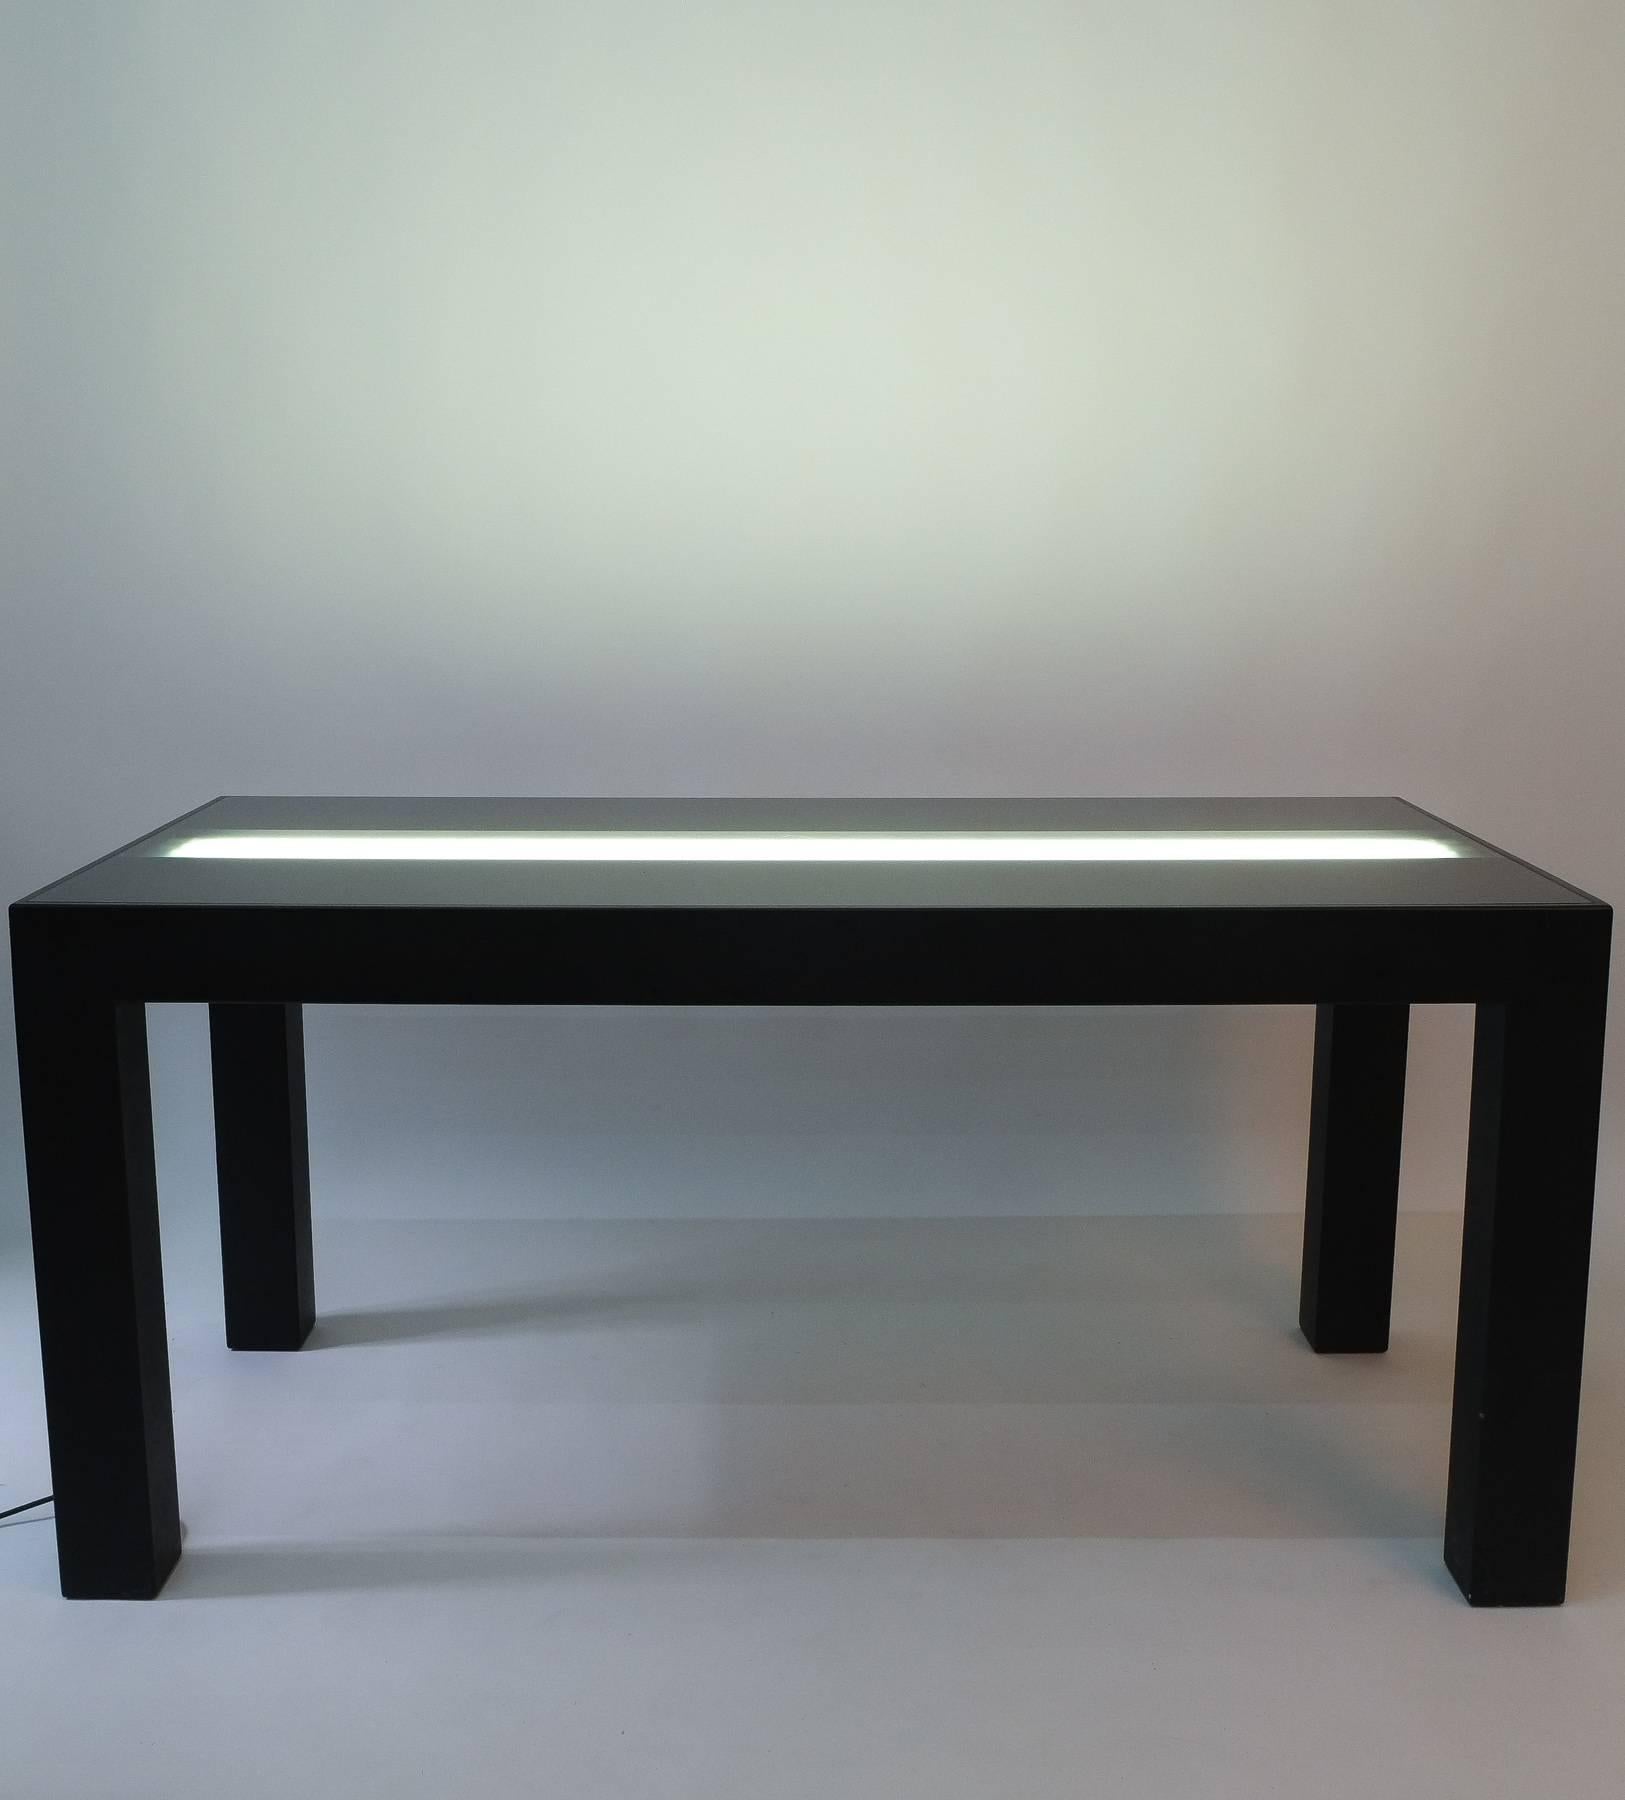 Post-Modern Johanna Grawunder Illuminated Dining Table by  for Post-Design, 2001 For Sale